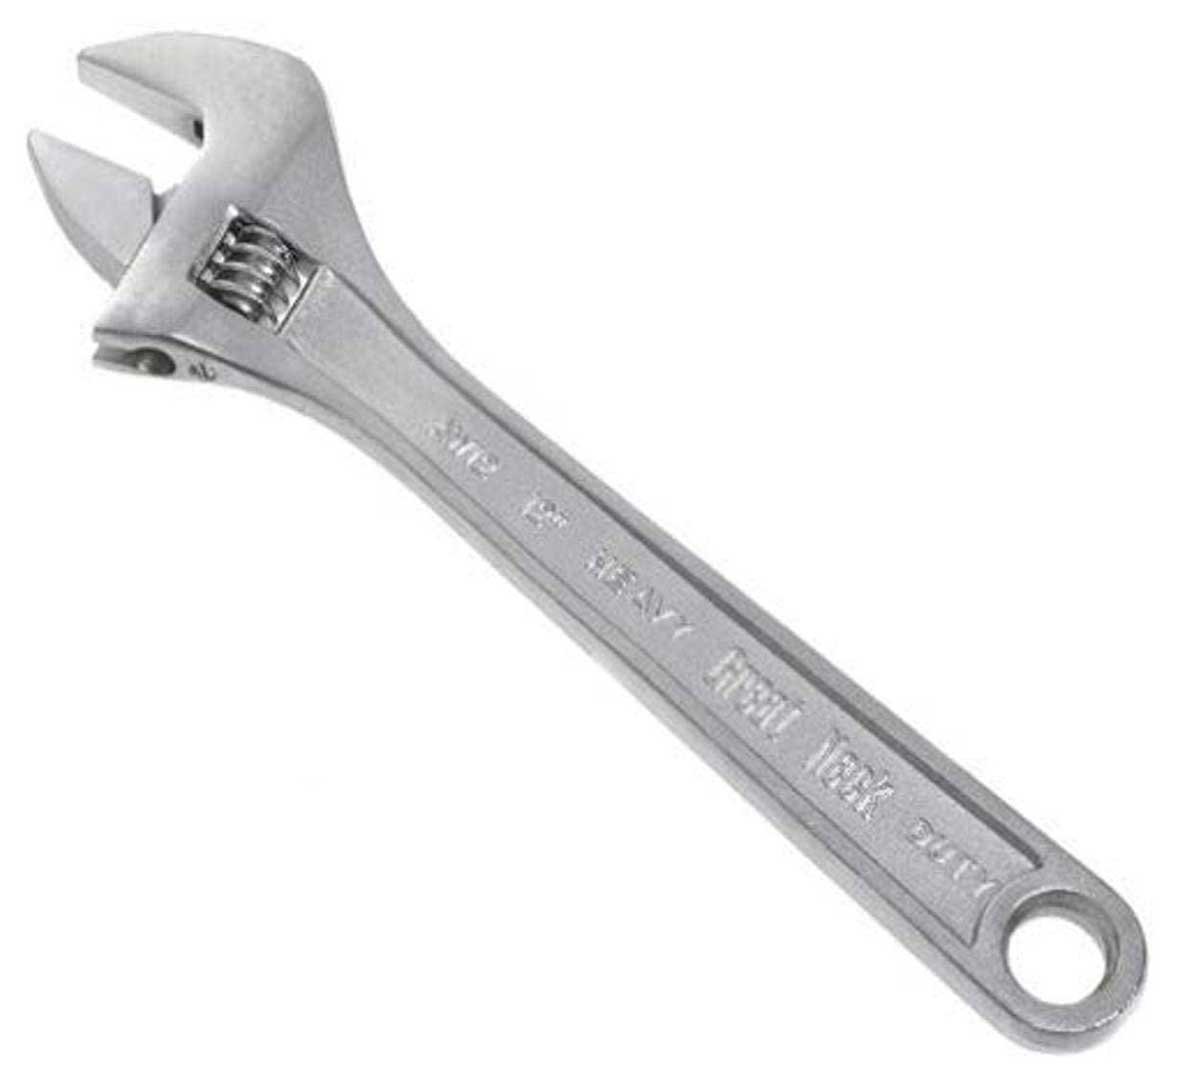 GreatNeck Saw AW12C Adjustable Wrench